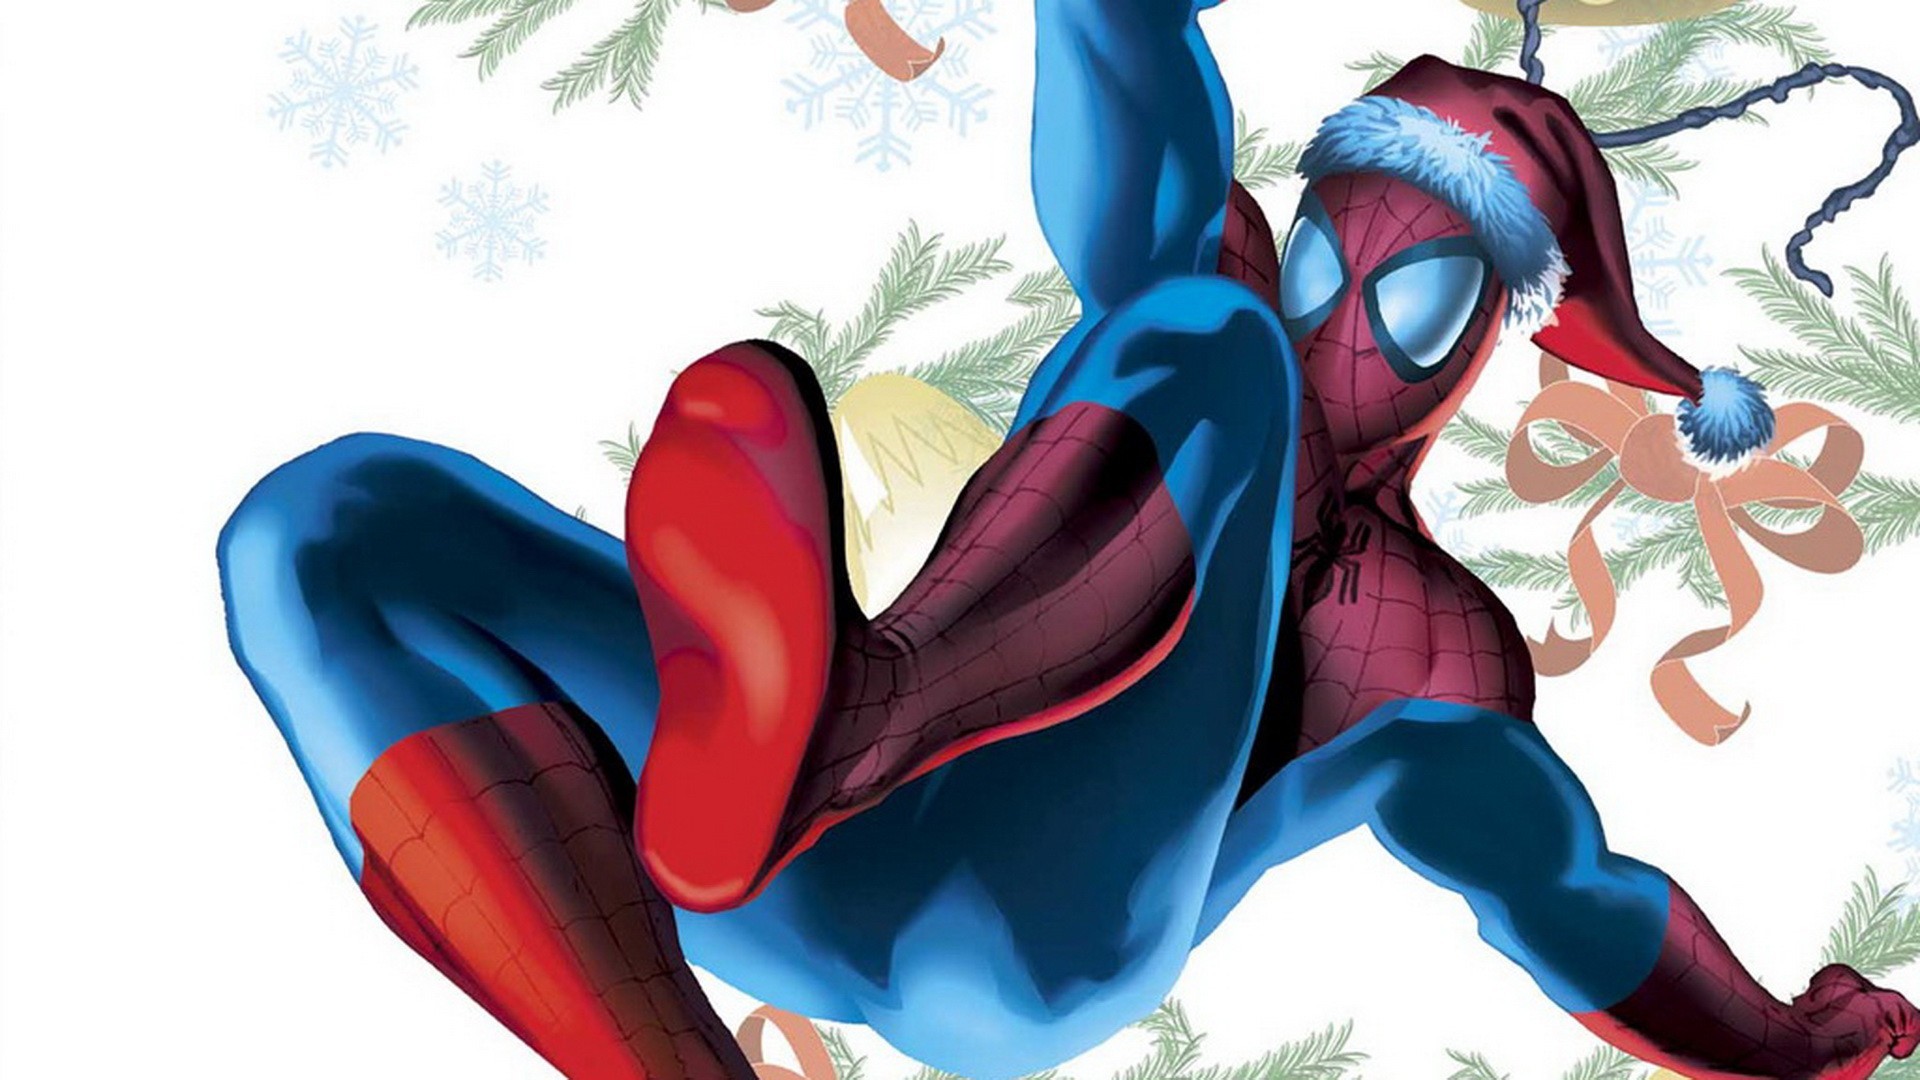 Merry Christmas from your friendly neighbor Spiderman